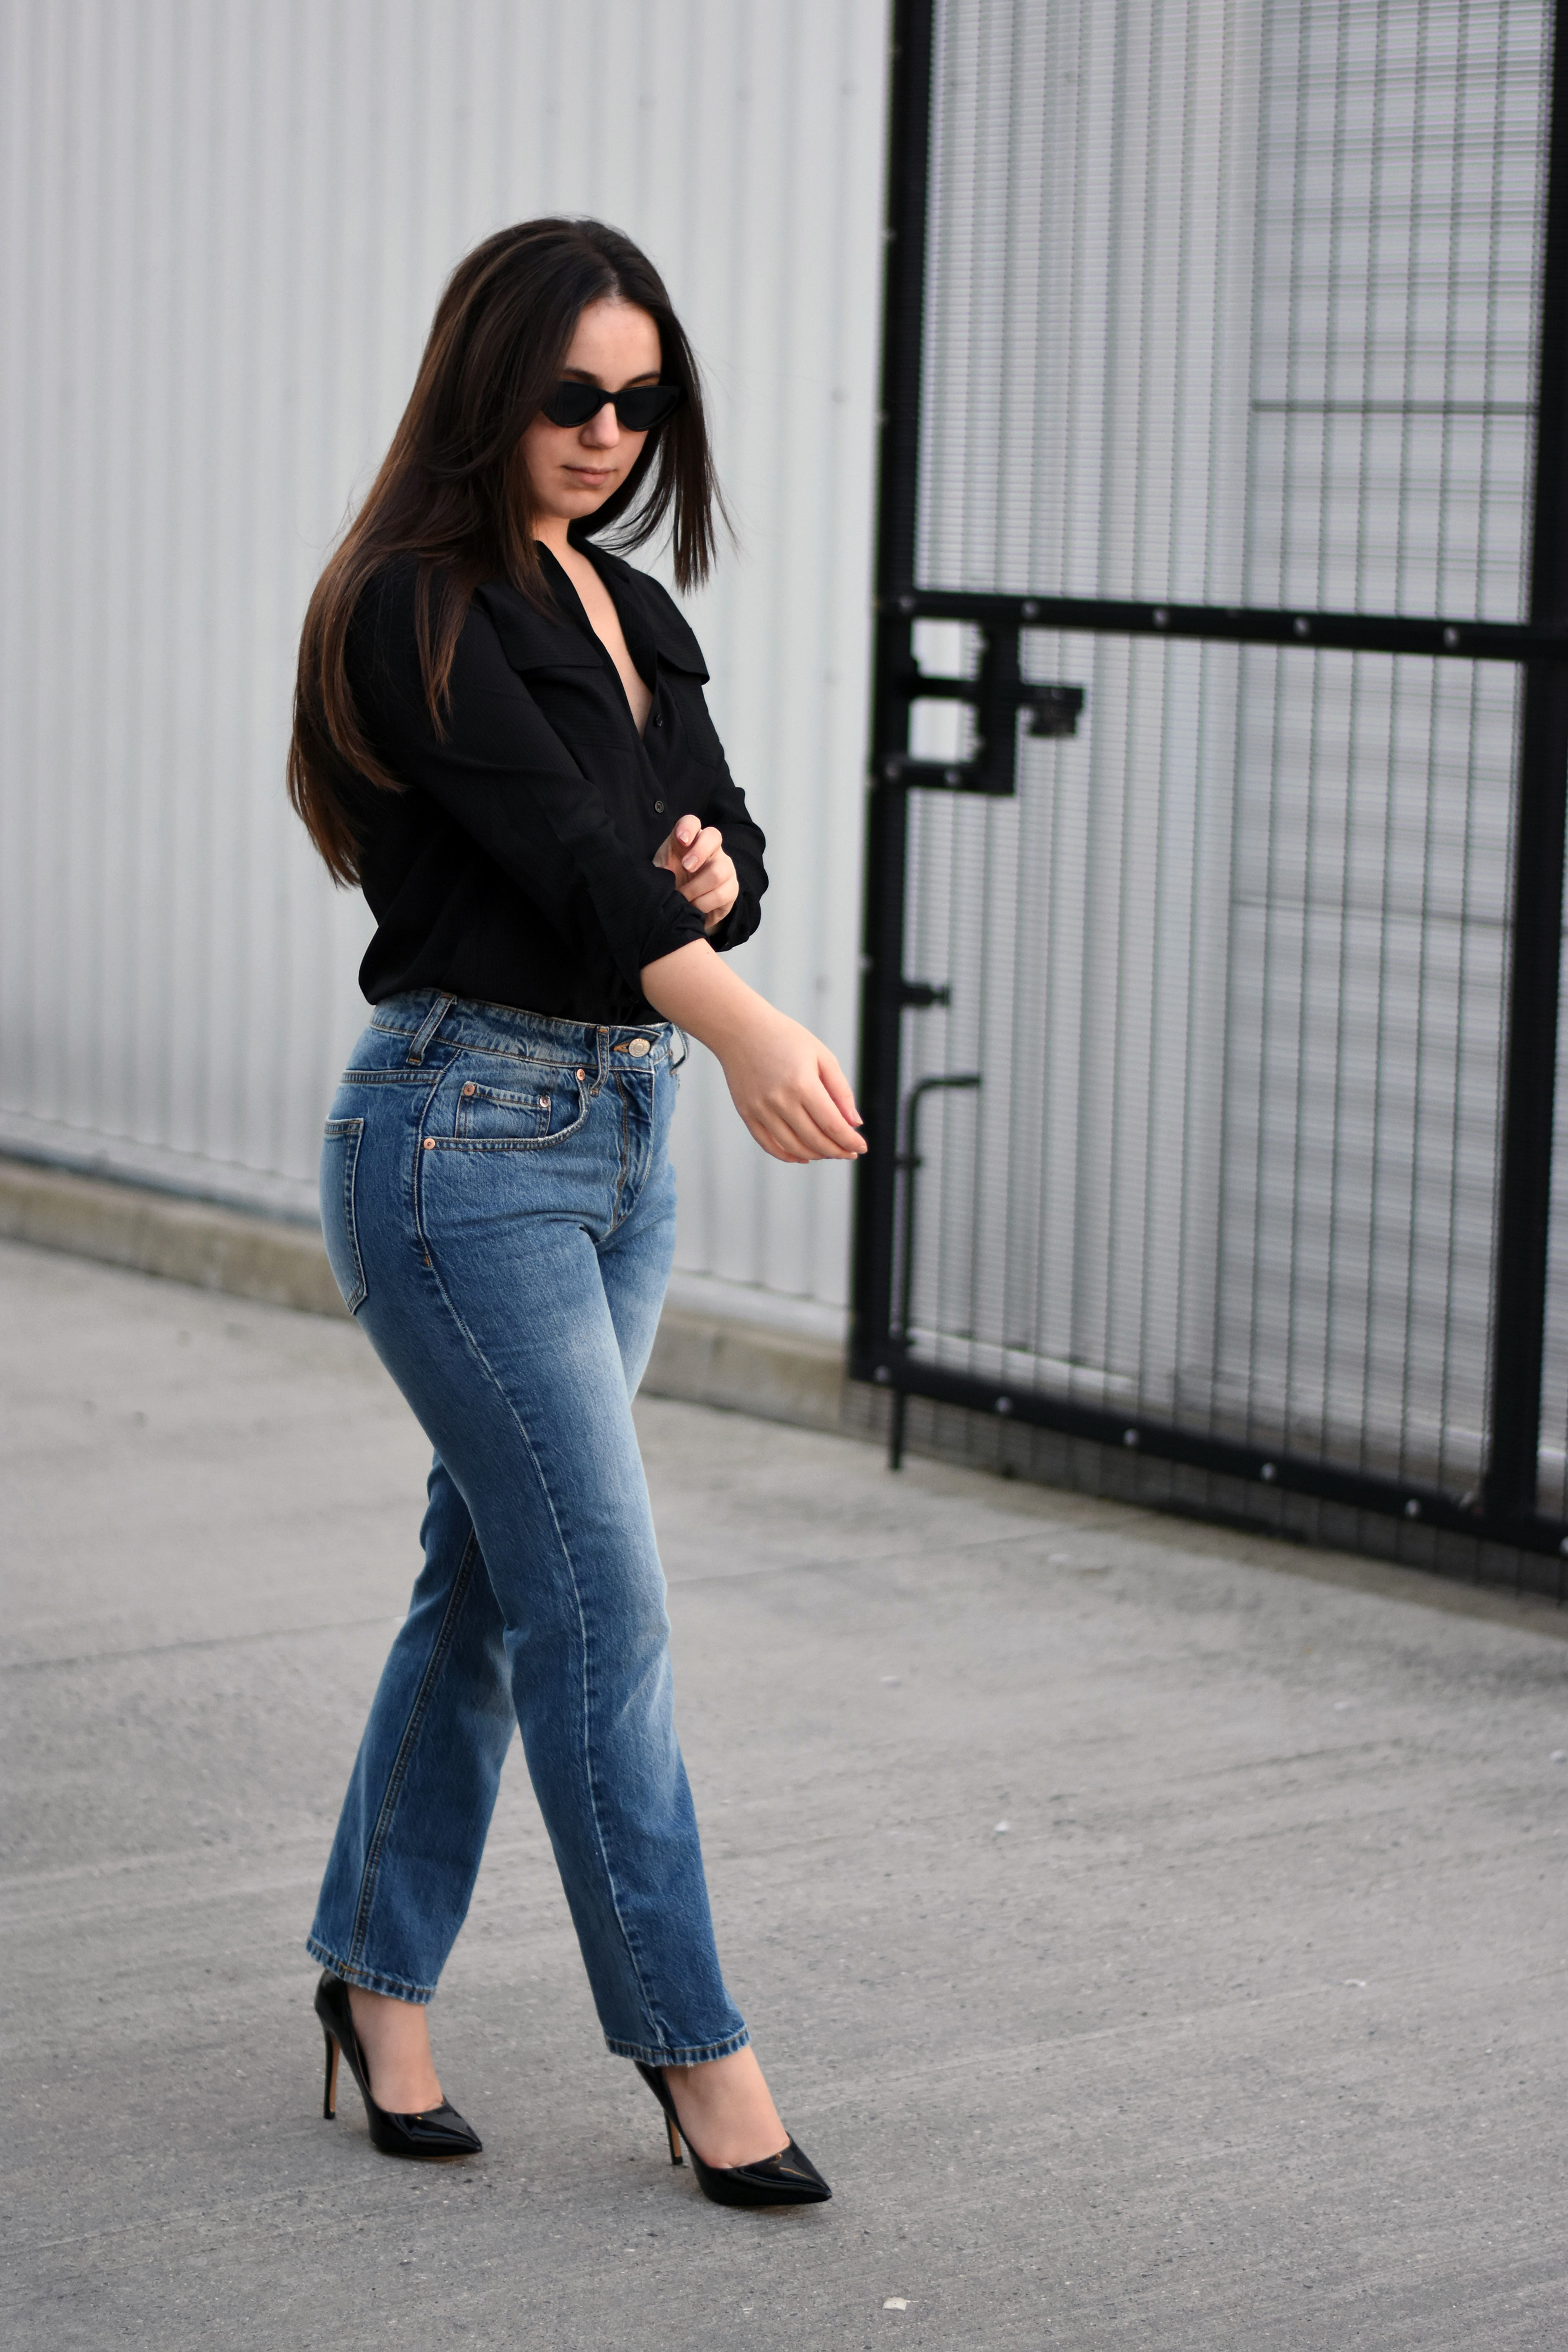 The Jean life | How To Buy And Care For Your Jeans | UPTOWN STYLE Media